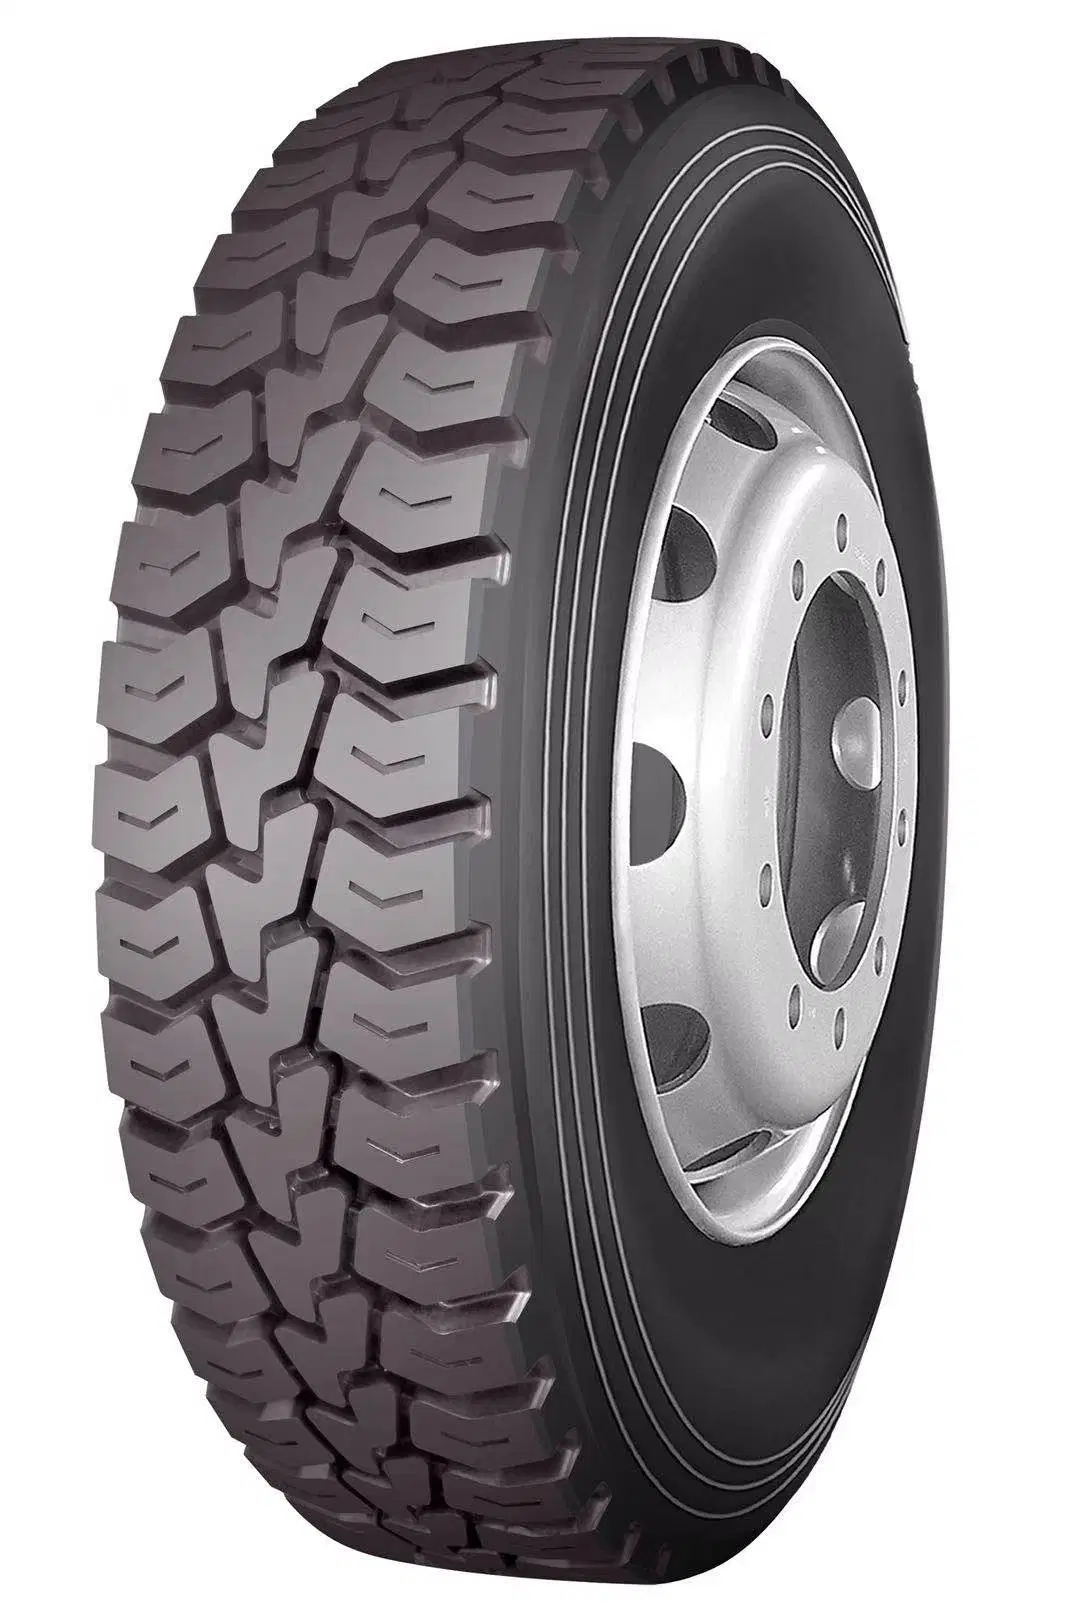 Onyx /Torque Quality Inner Tube Tyre/All Steel Radial Truck and Bus Tyre with High Performance/12.00r20